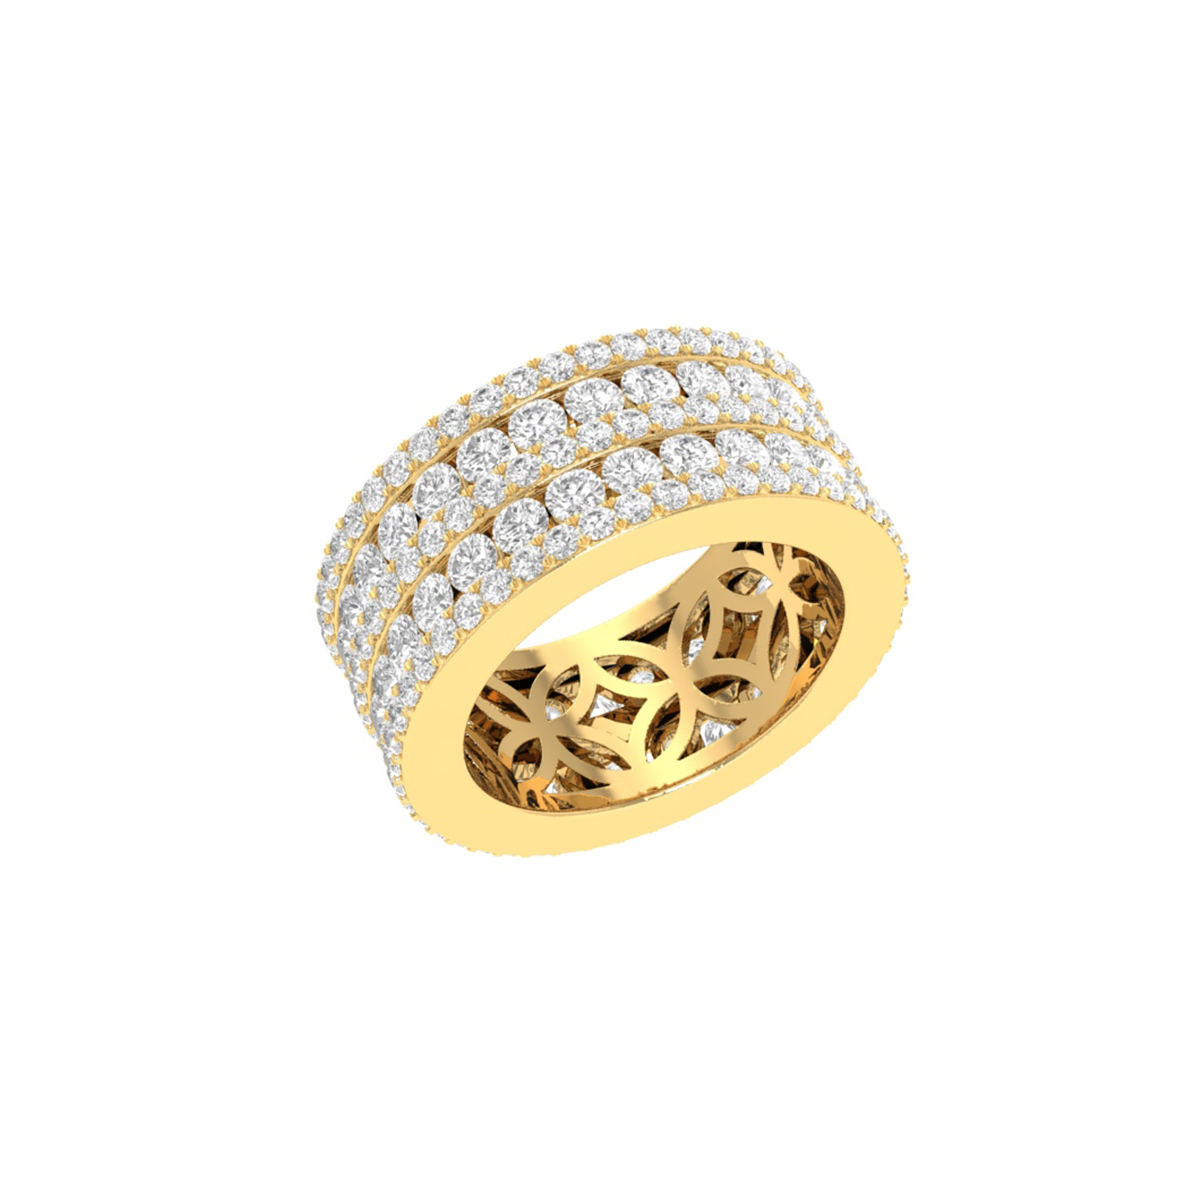 ICED OUT BRILLIANCE DIAMOND RING - The Ice Champ